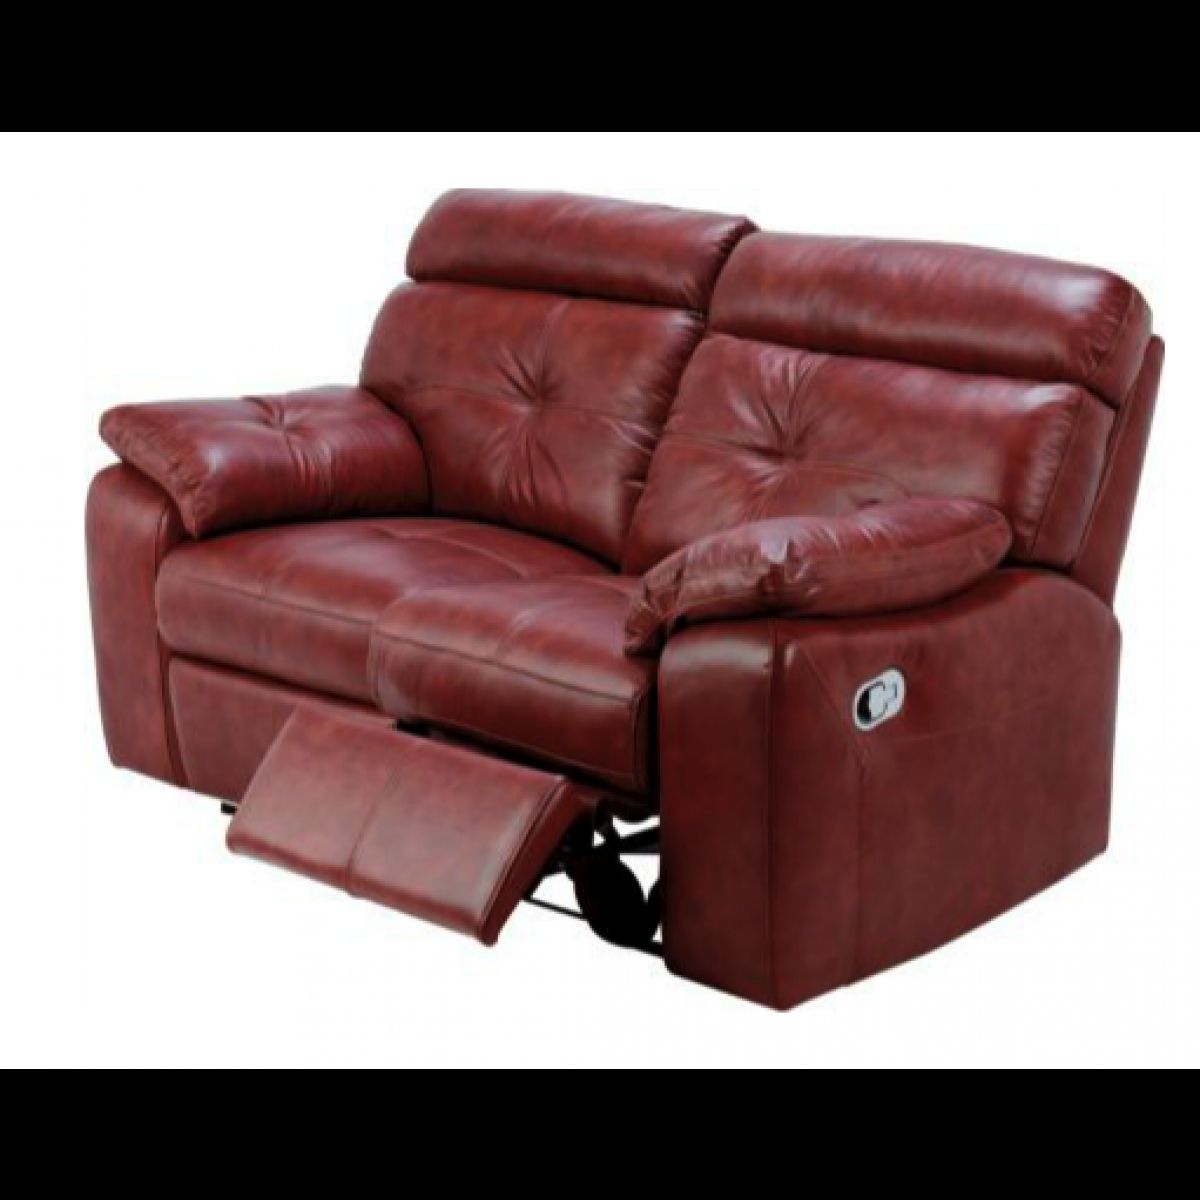 Cameron Regular Recliner Sofa Chestnut Furnico Village Intended For Recliner Sofa Chairs (View 6 of 15)